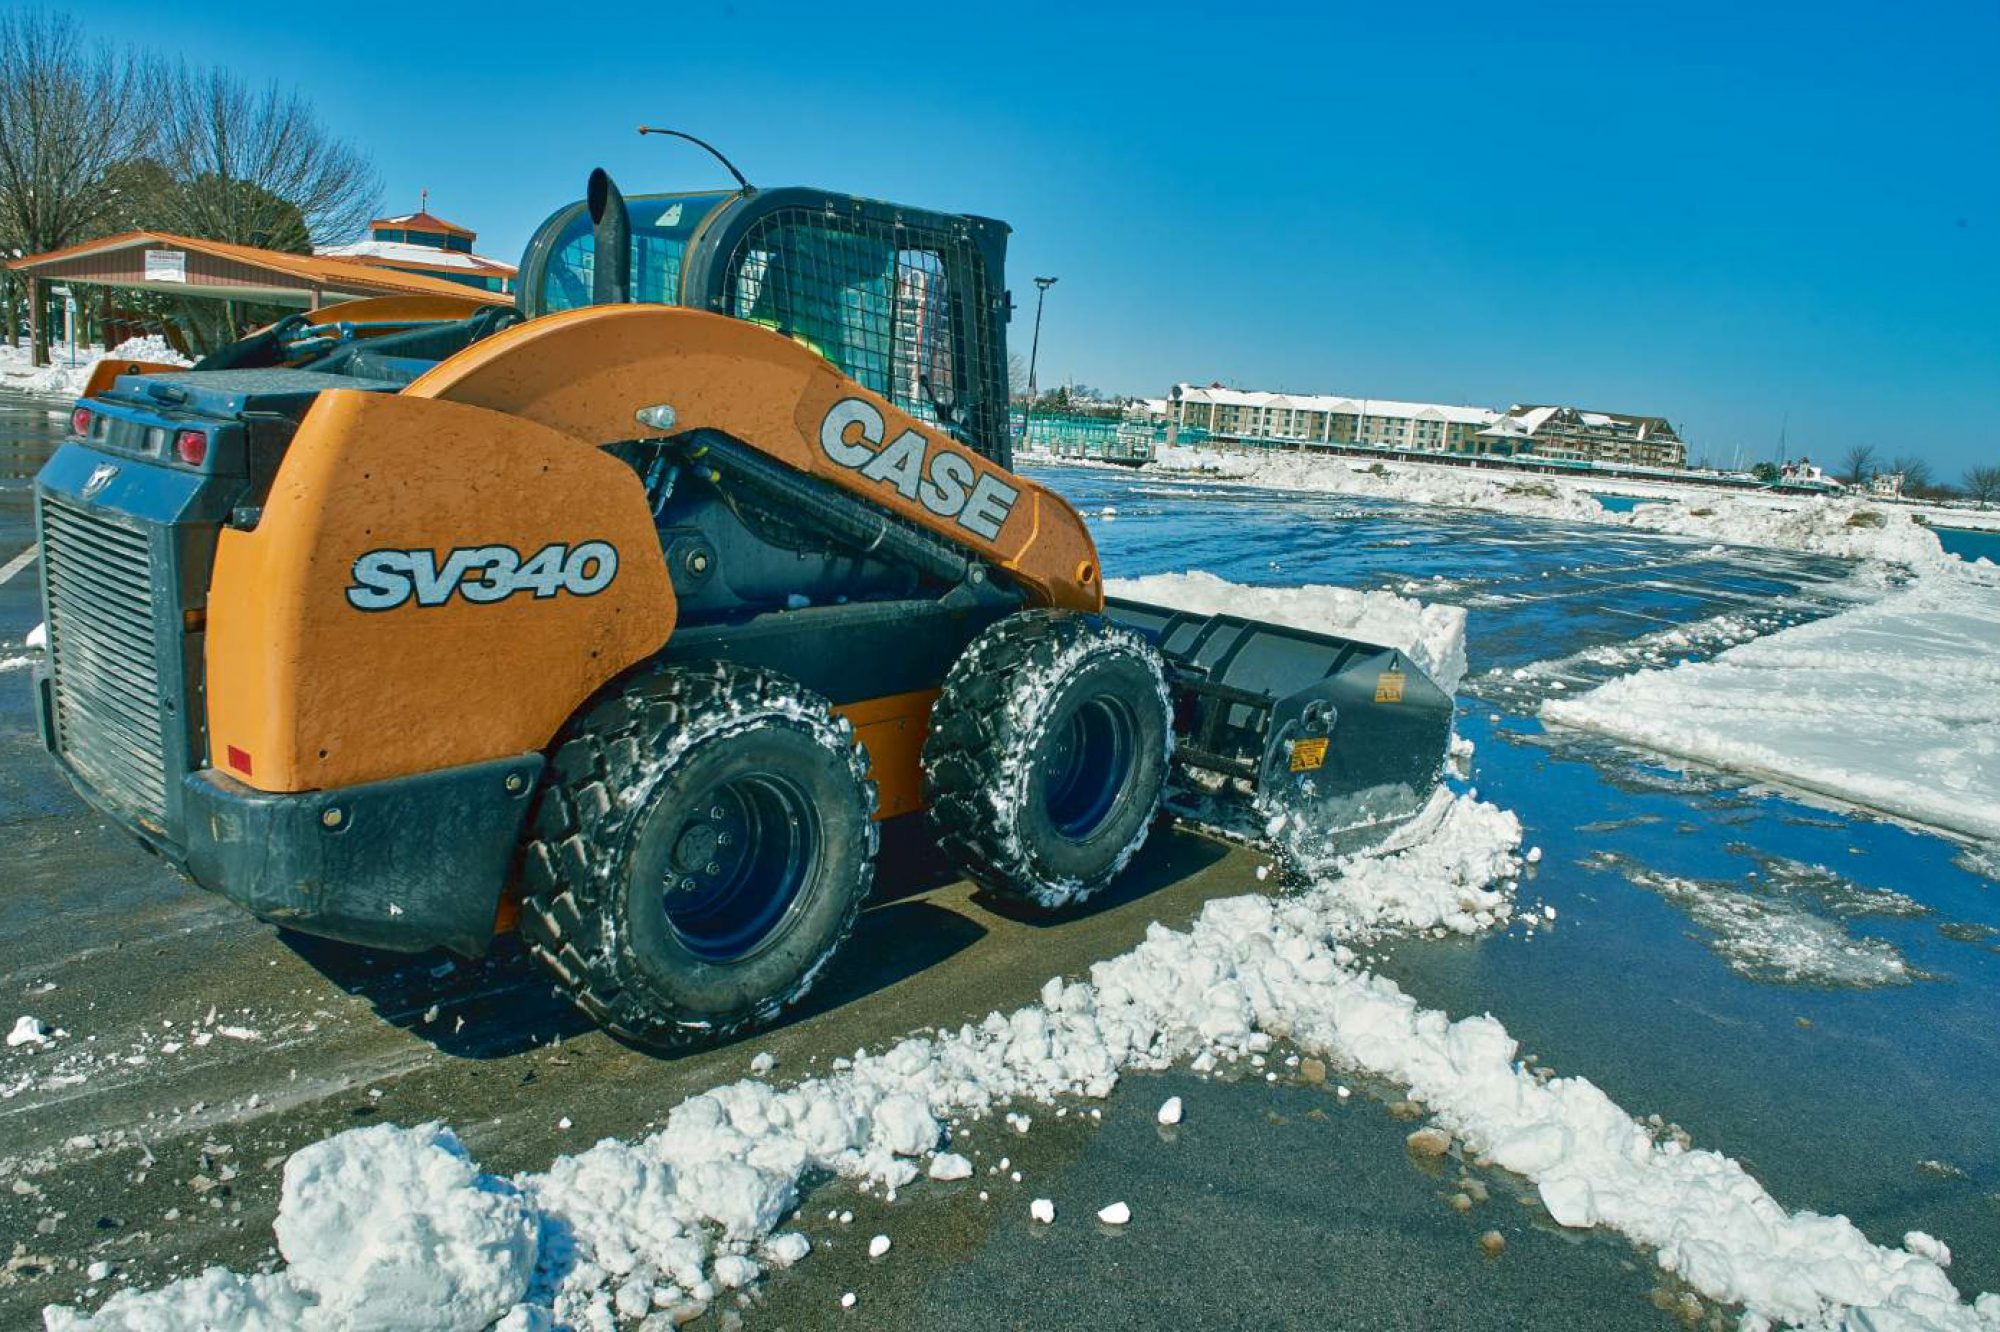 The contractor is able to use less deicing material on the porous asphalt pavement, and expend less energy plowing the surface. Photo courtesy CASE Construction Equipment.